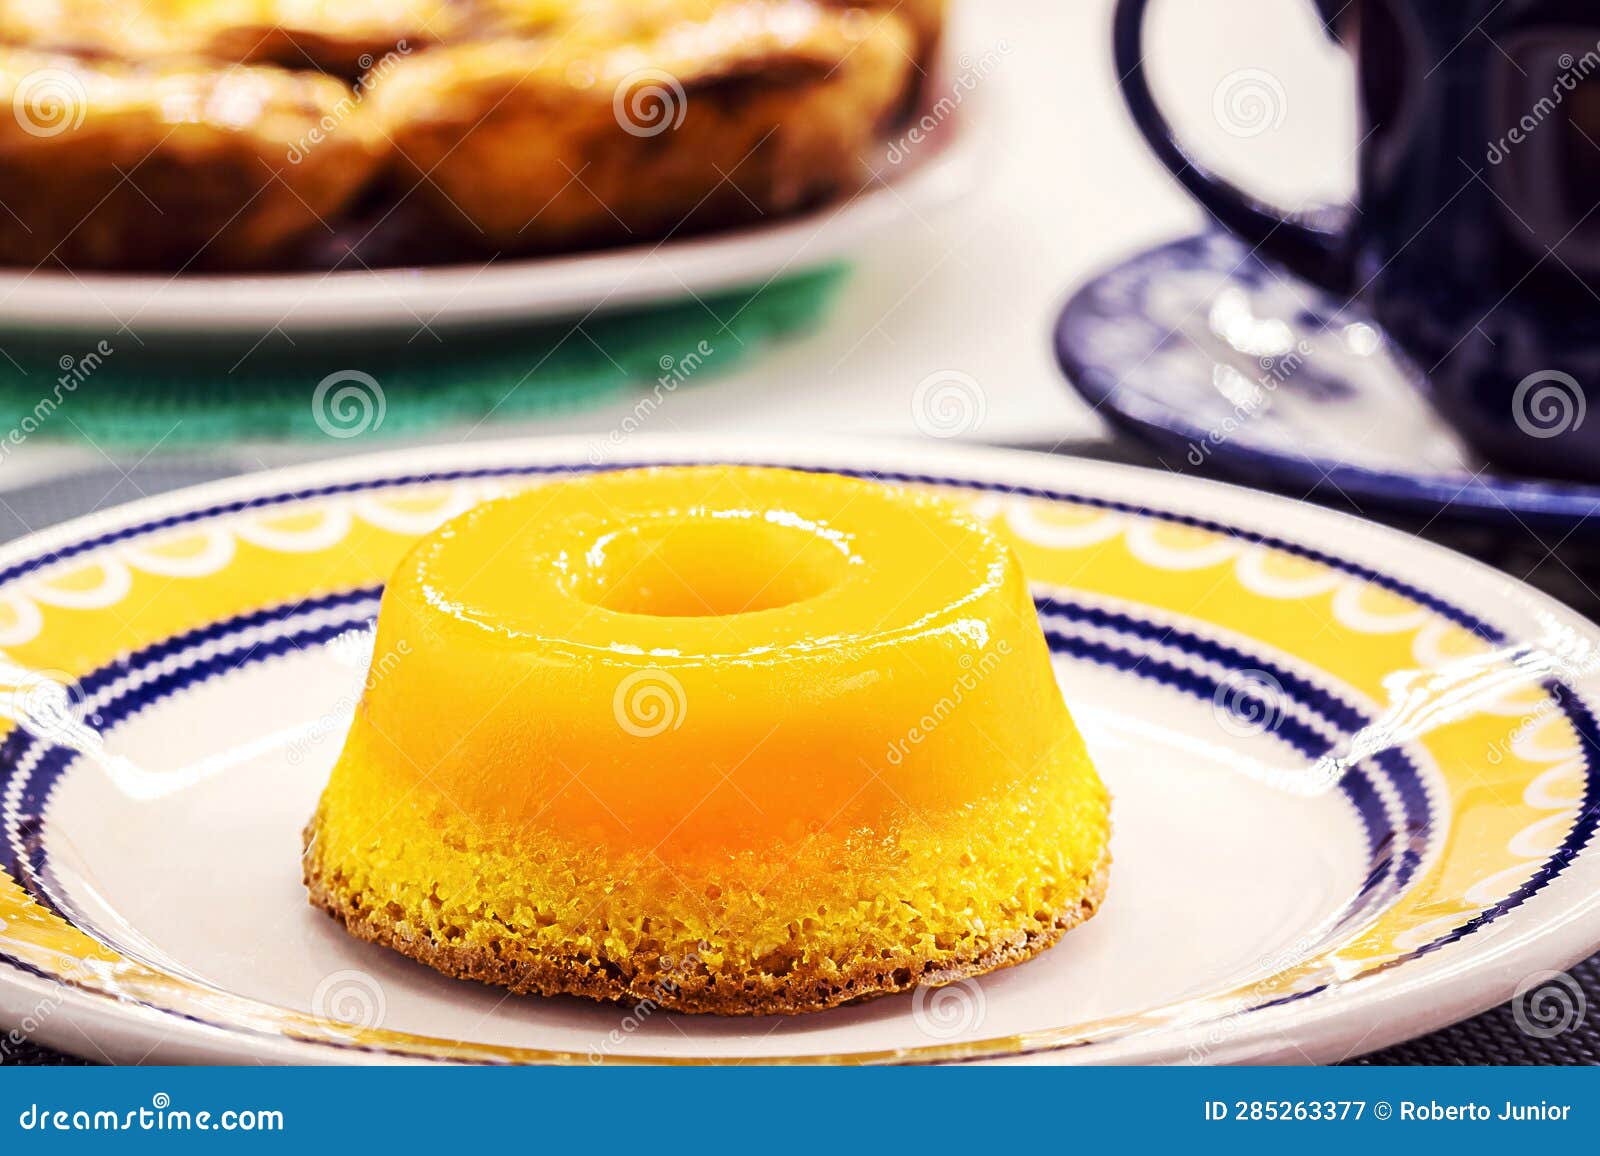 dessert made with eggs, called in brazil as quindim and in portugal as brisa de lis, a tasty yellow sweet